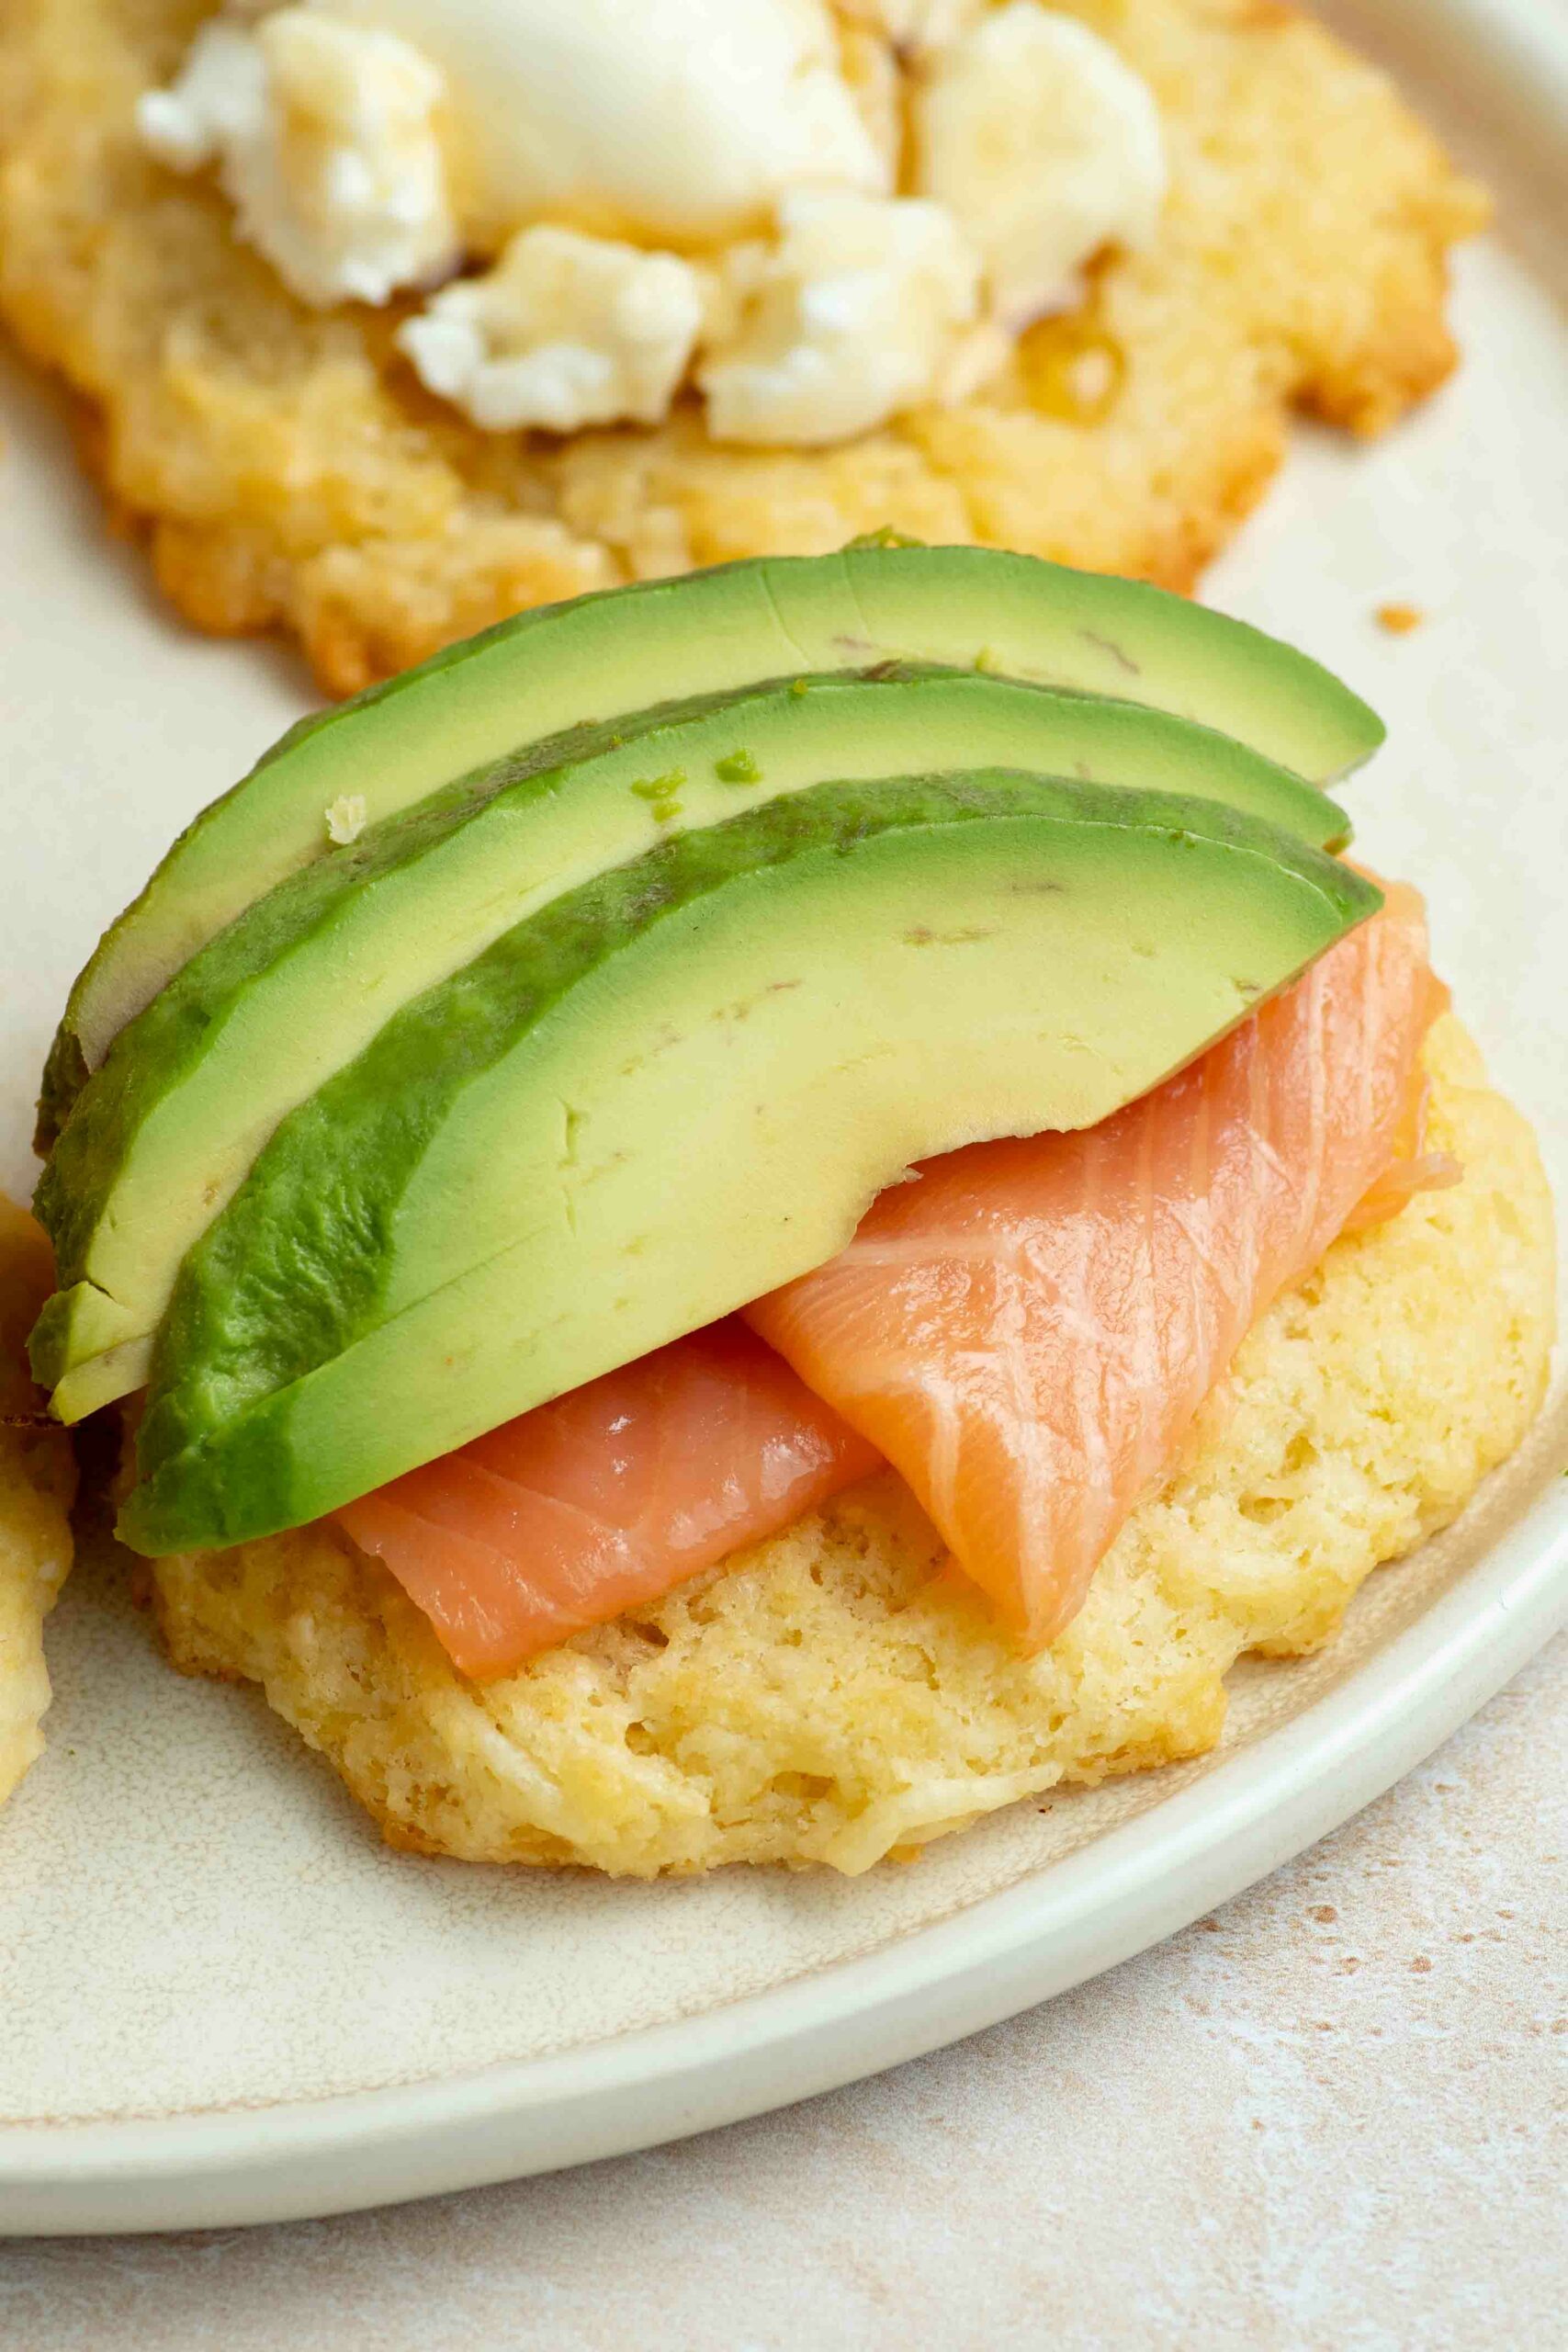 A cookie placed on a plate and garnished with smoked salmon and three slices of avocado.